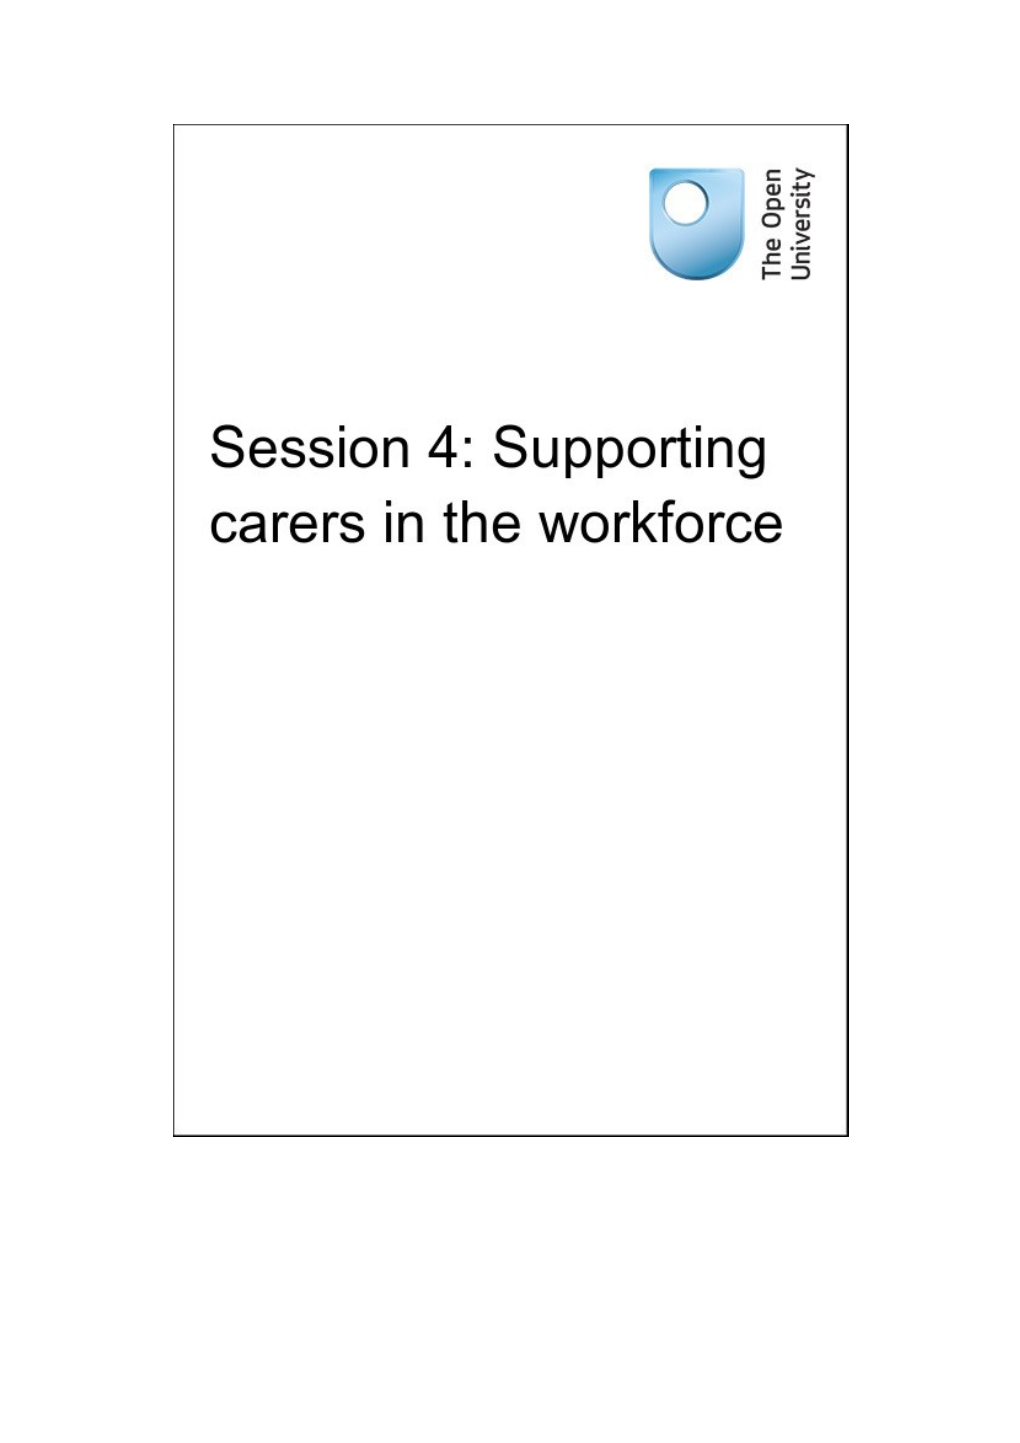 Session 4: Supporting Carers in the Workforce